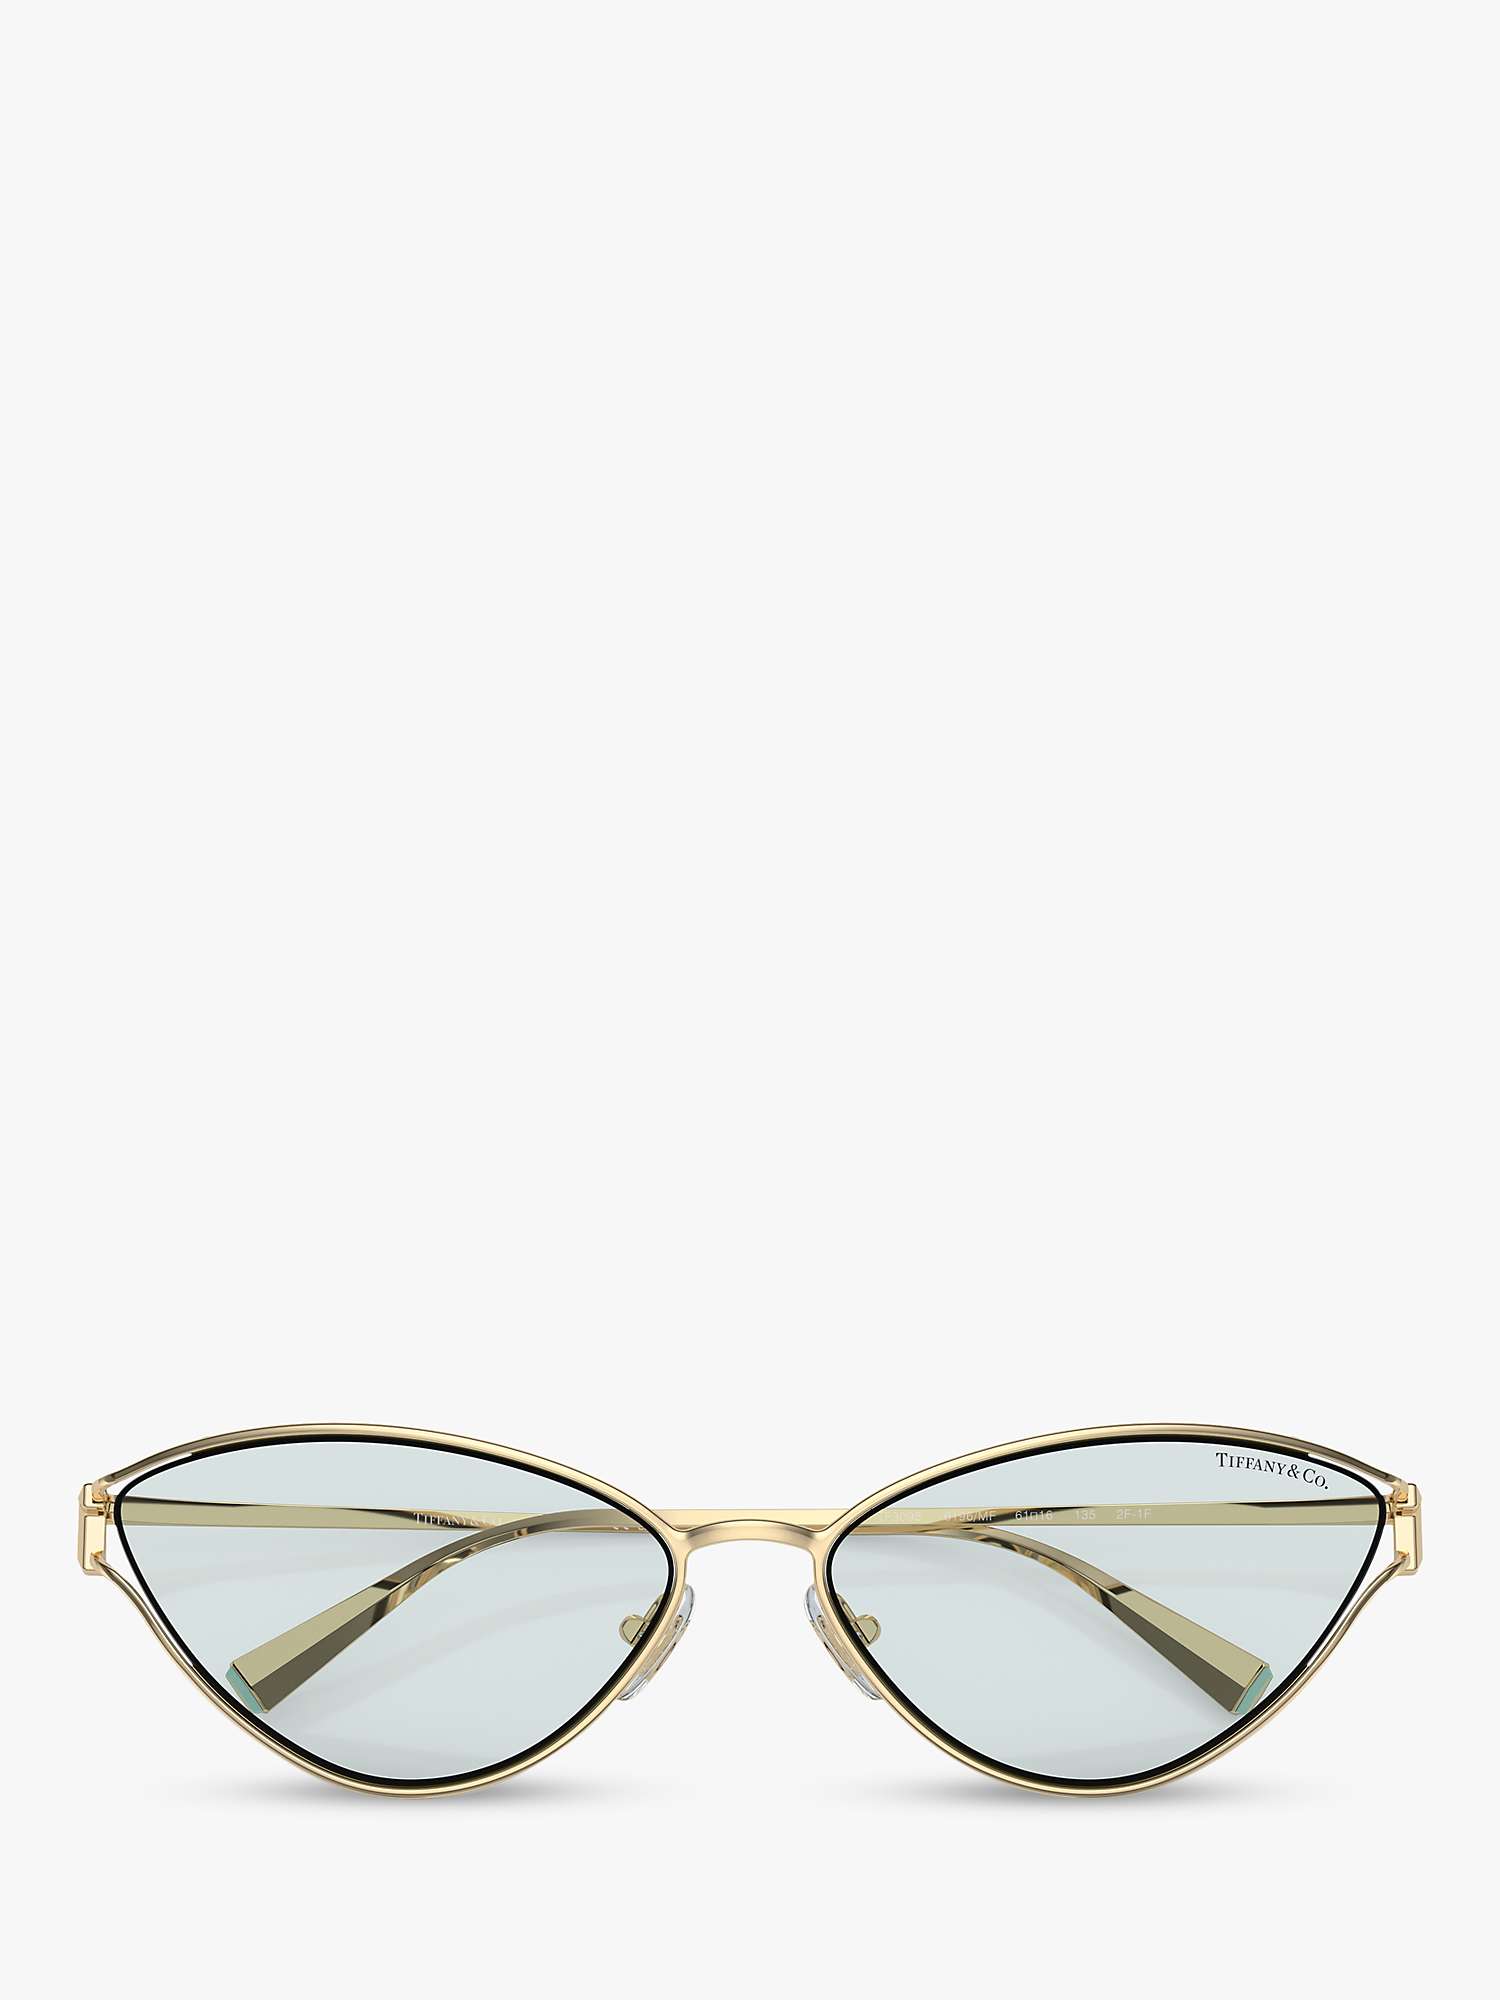 Buy Tiffany & Co TF3095 Women's Cat's Eye Sunglasses, Pale Gold/Blue Online at johnlewis.com